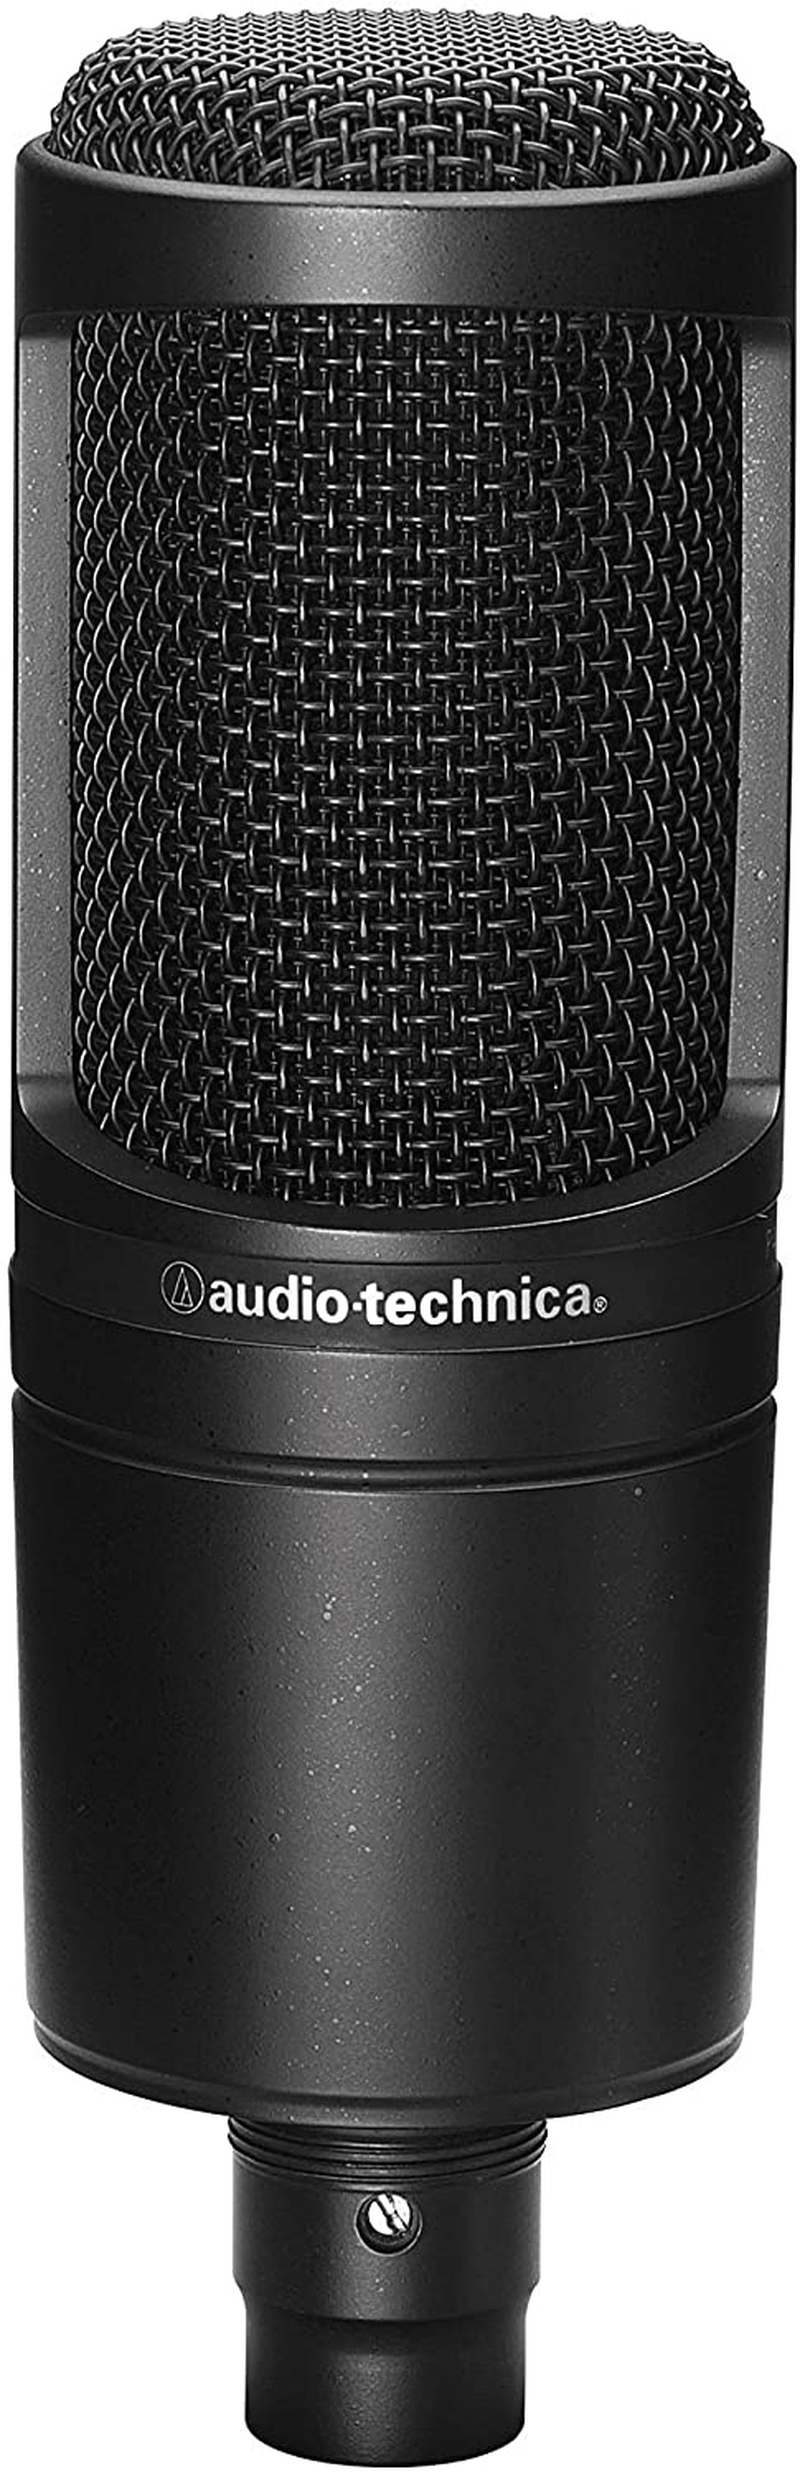 Audio-Technica AT2020 Cardioid Condenser Studio XLR Microphone, Ideal for Project/Home Studio Applications Electronics > Audio > Audio Components > Microphones Audio-Technica   